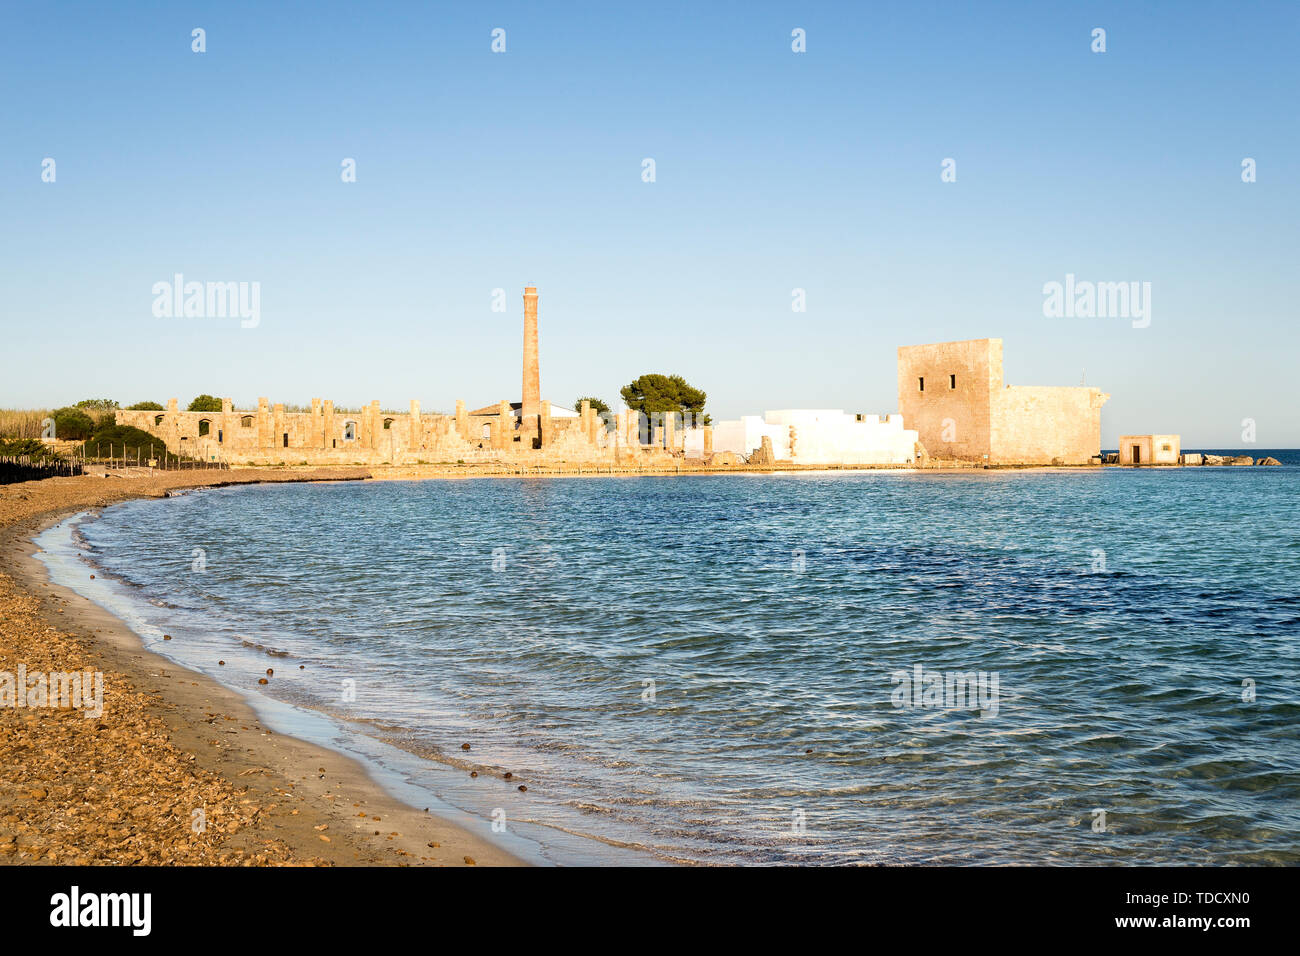 Ruins of The Tuna Factory of Vendicari Nature Reserve in Sicily, Italy. Stock Photo